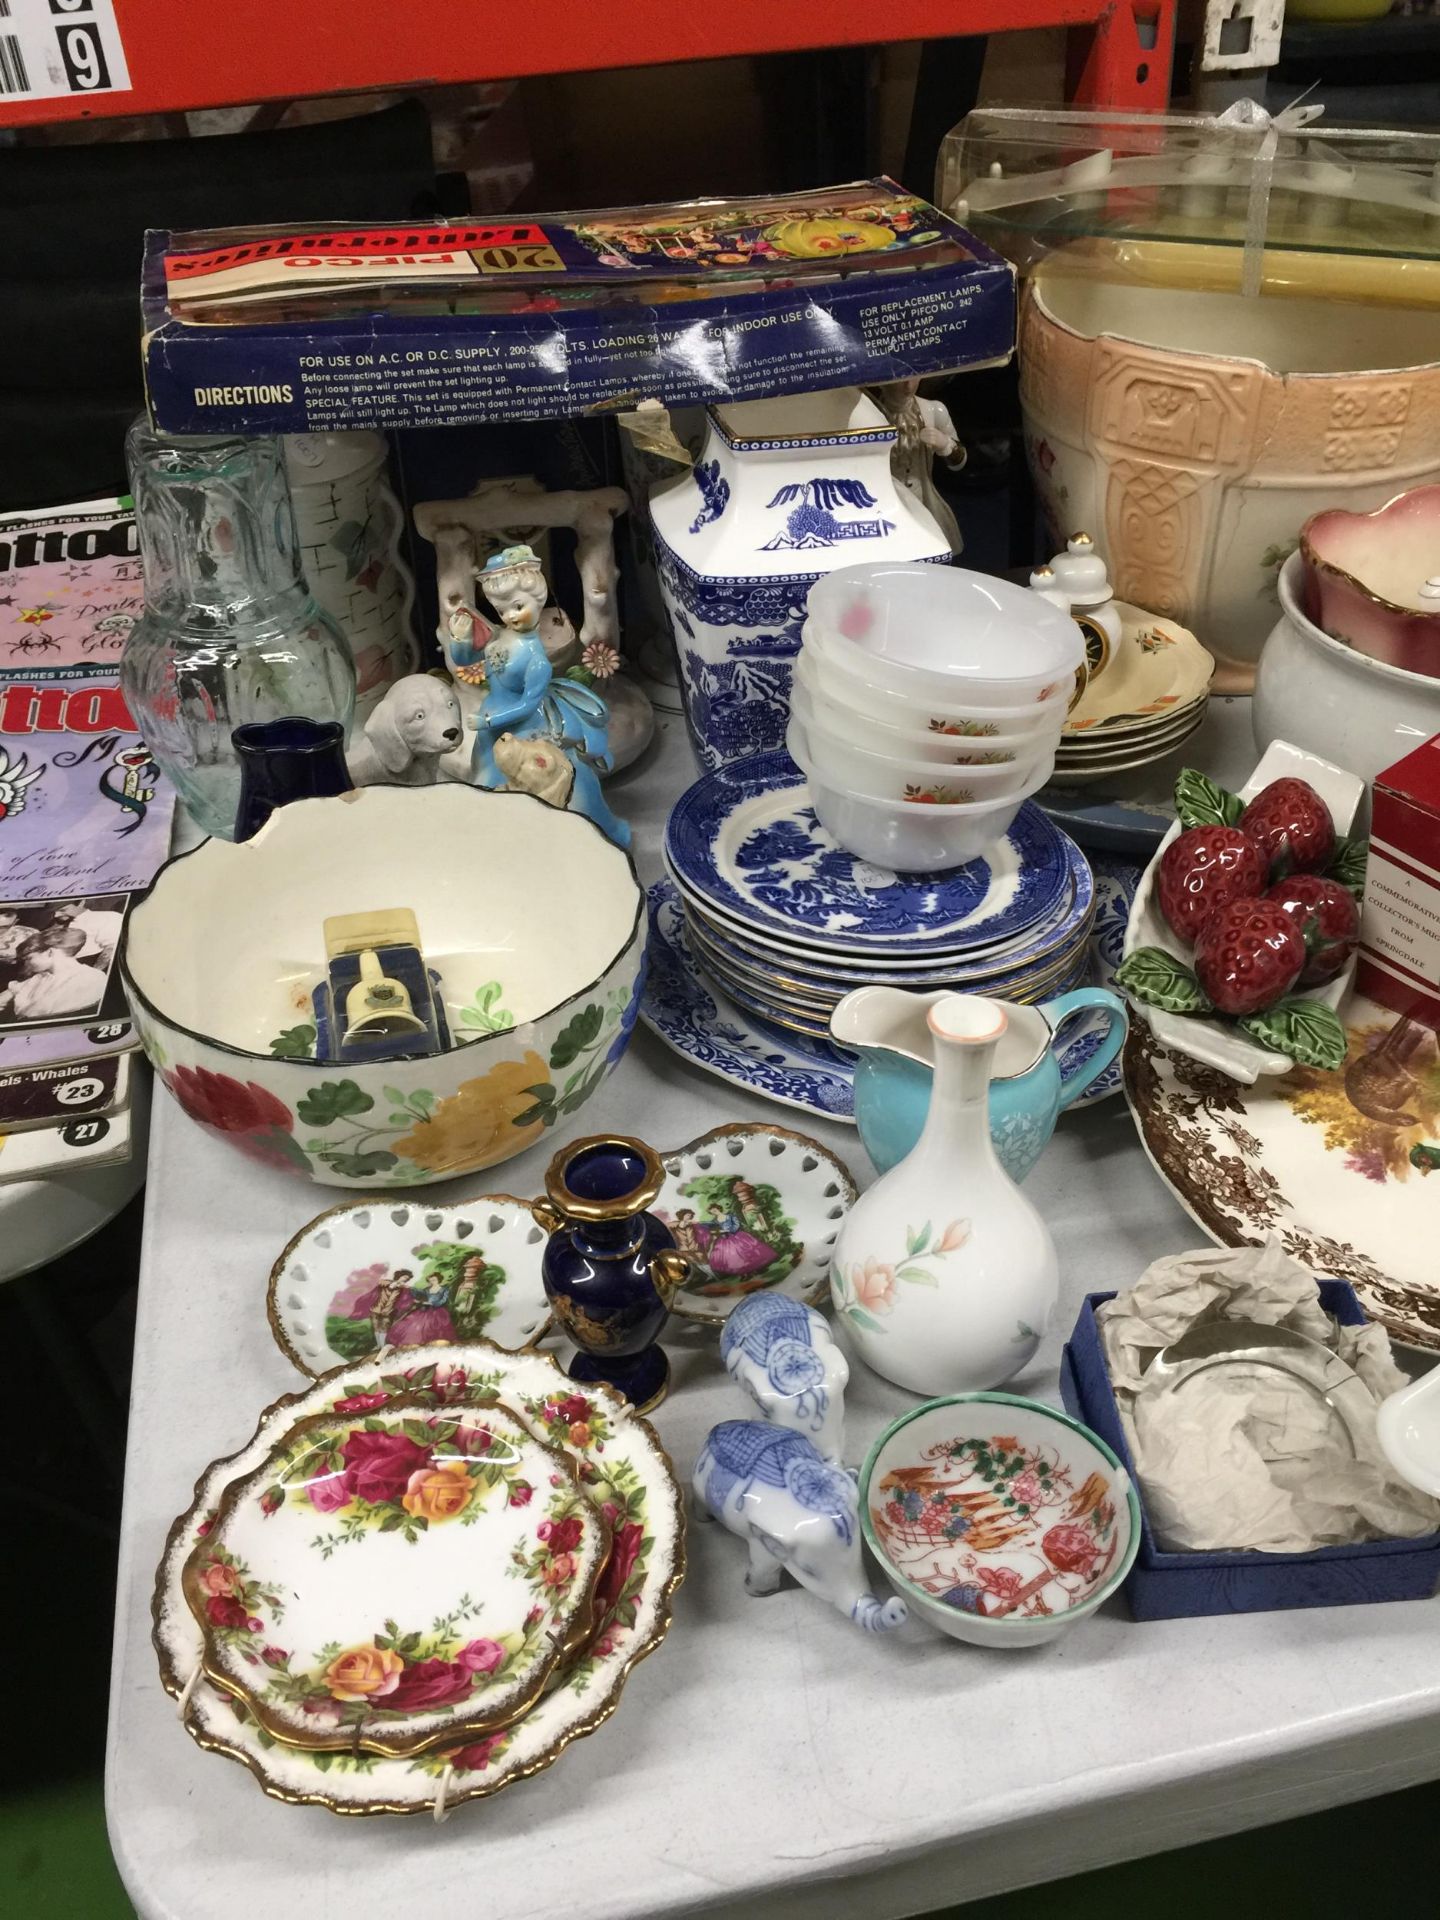 A VERY LARGE MIXED LOT TO INCLUDE PLATES, PLANTERS, VASES, GLASSWARE, VINTAGE CHRISTMAS LIGHTS, - Image 2 of 4